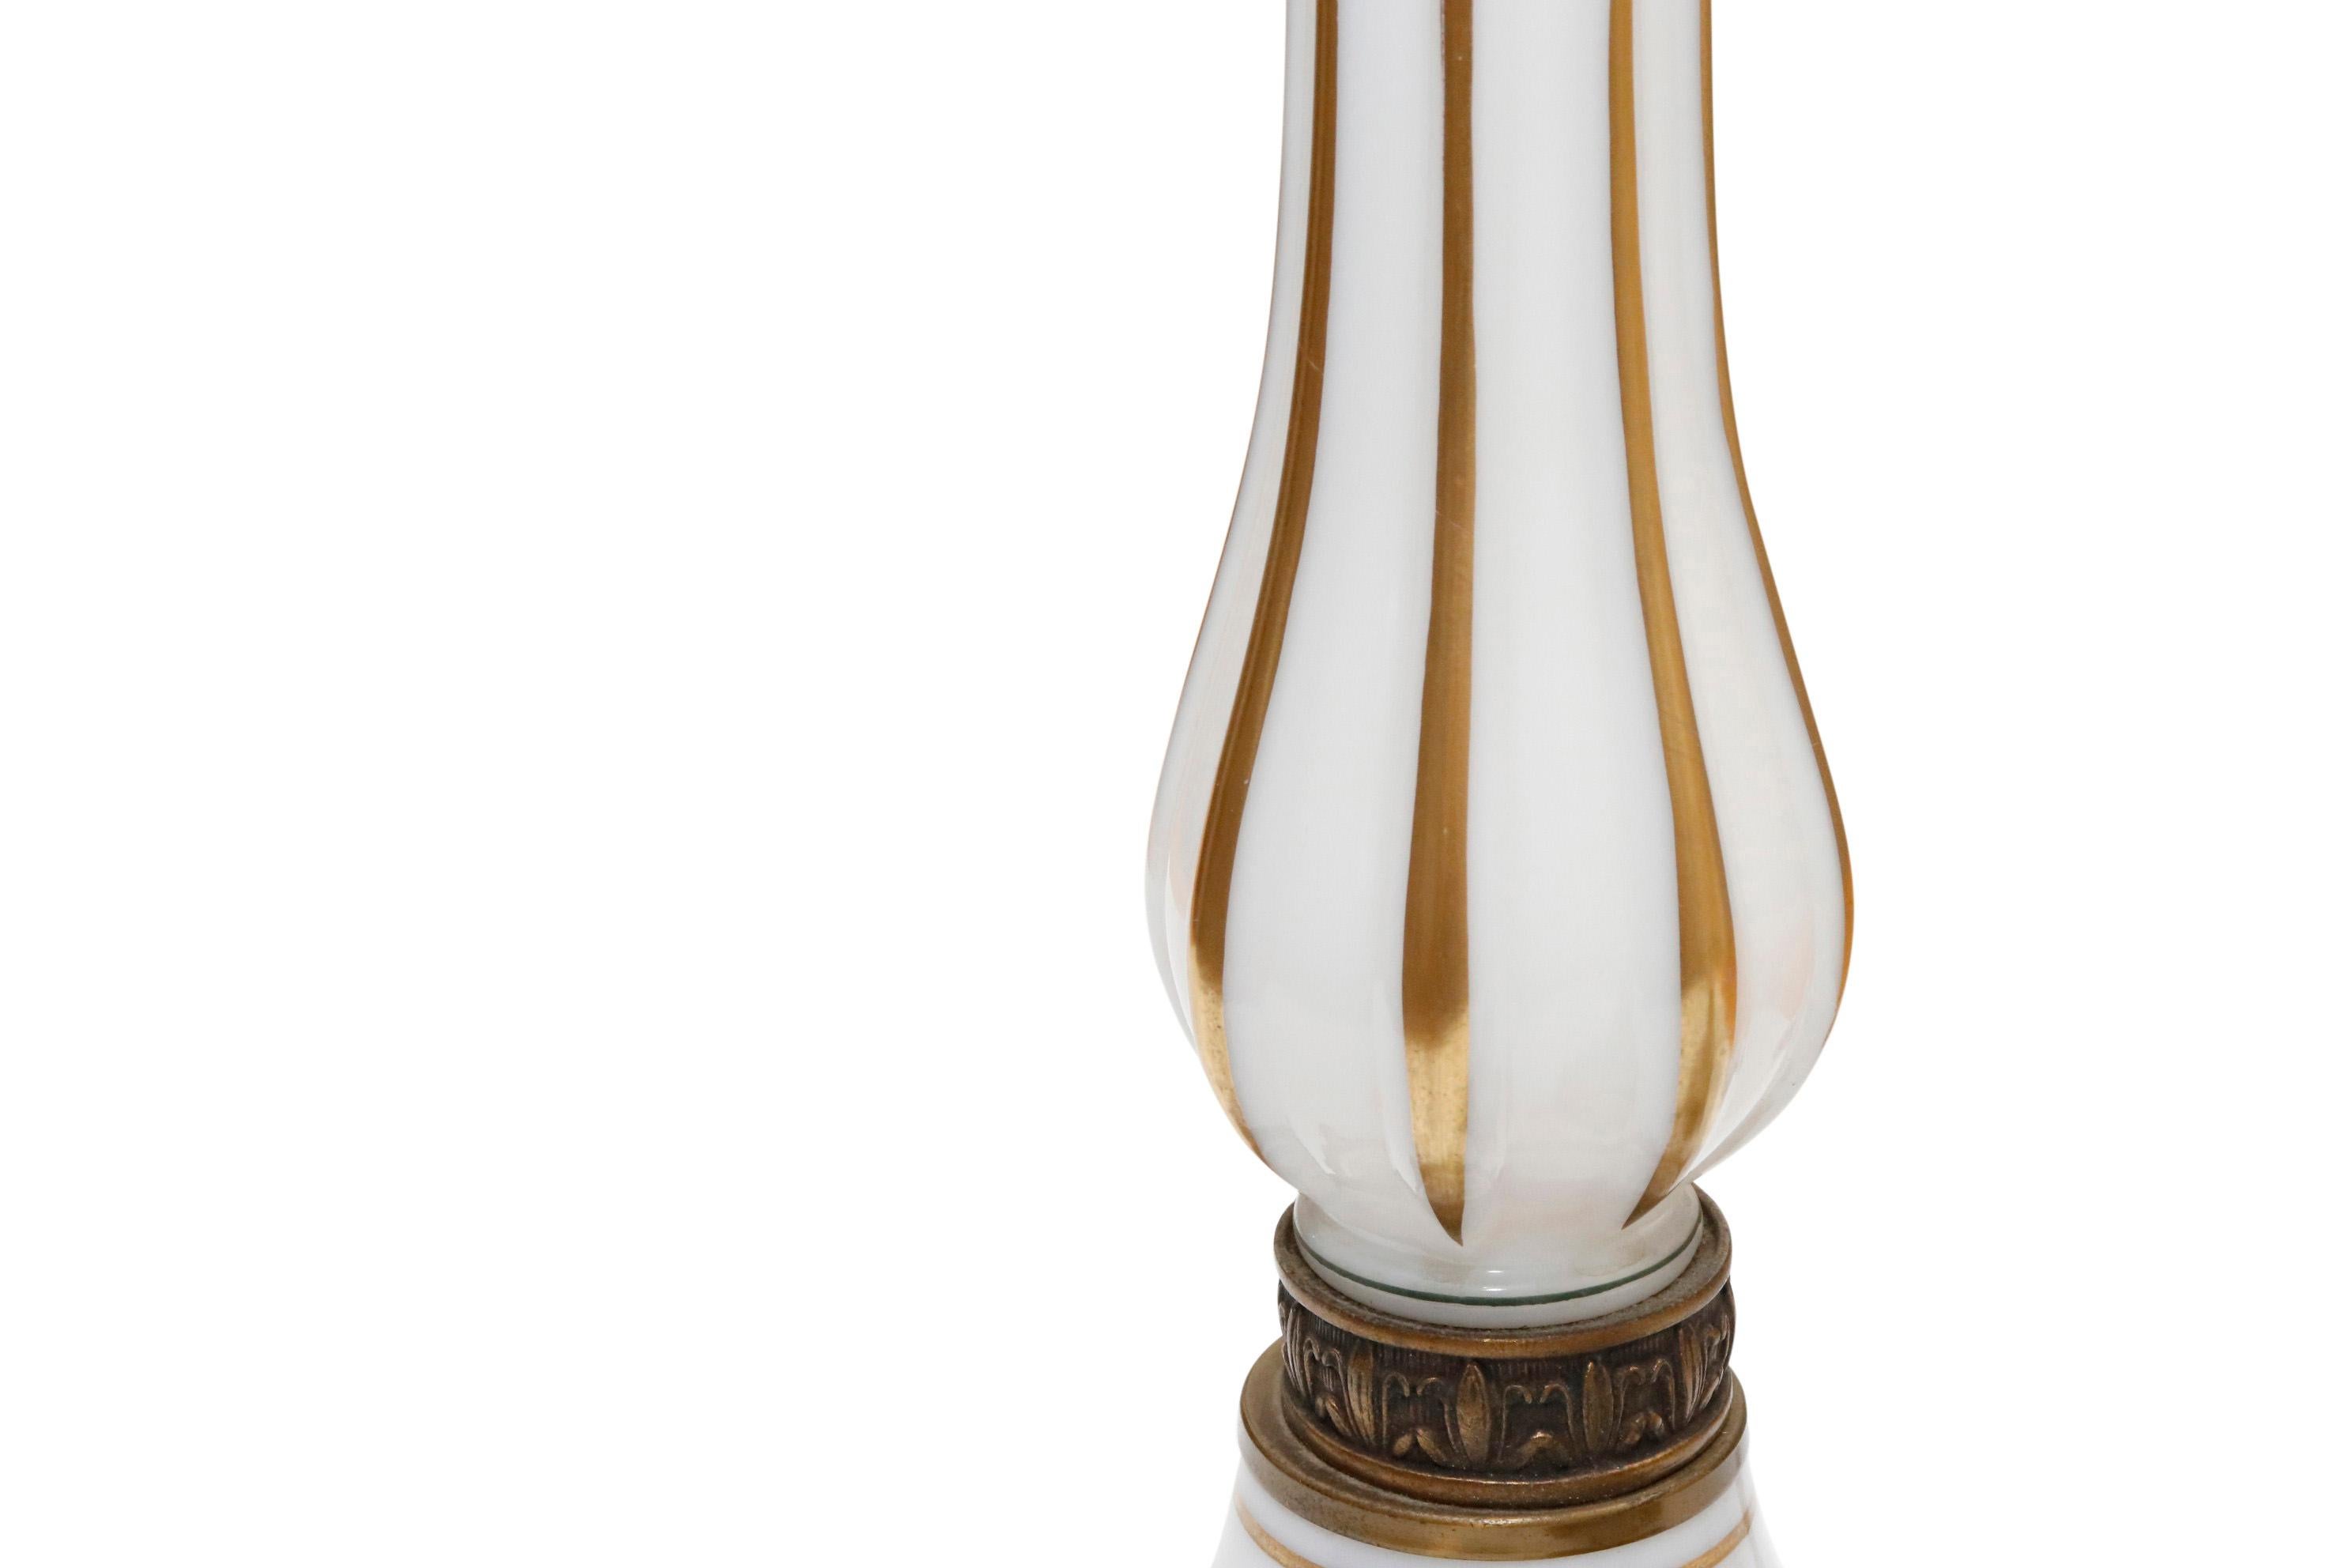 Monumental Glass & Brass Uplighter Table Lamps, a Pair For Sale 2